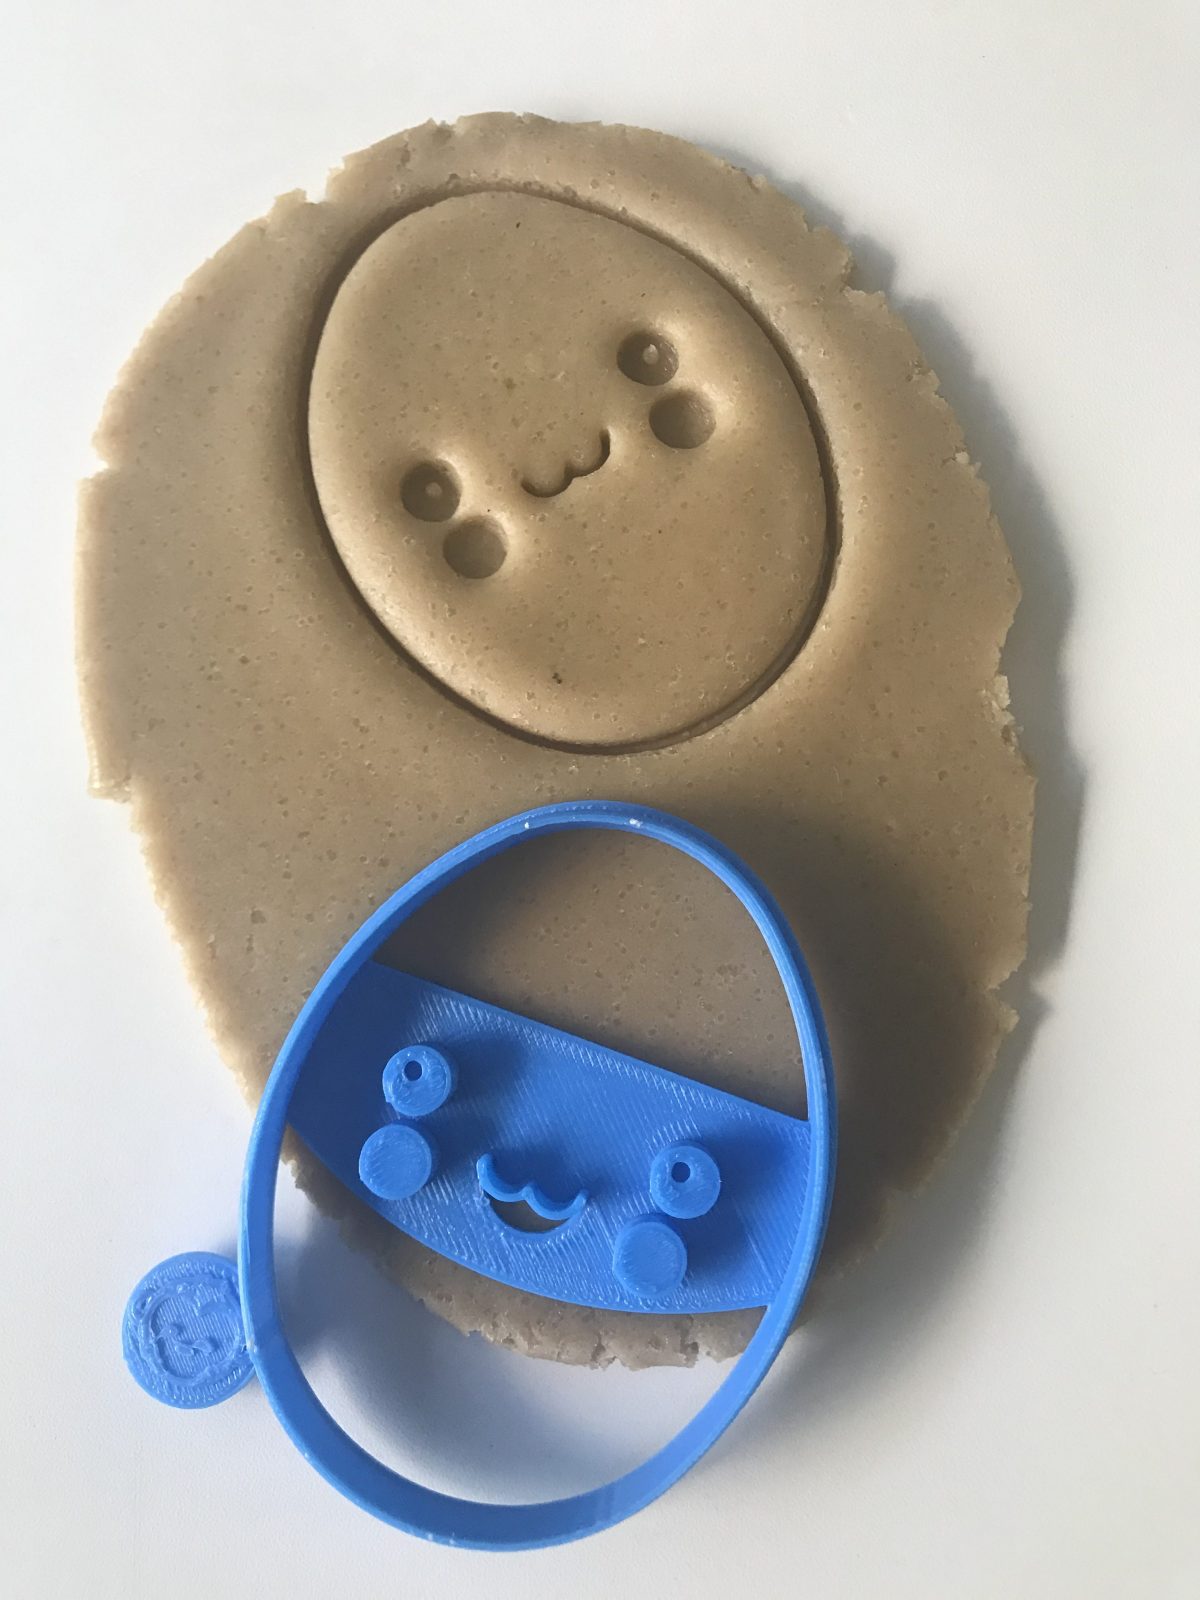 Normal Egg Cookie Cutter